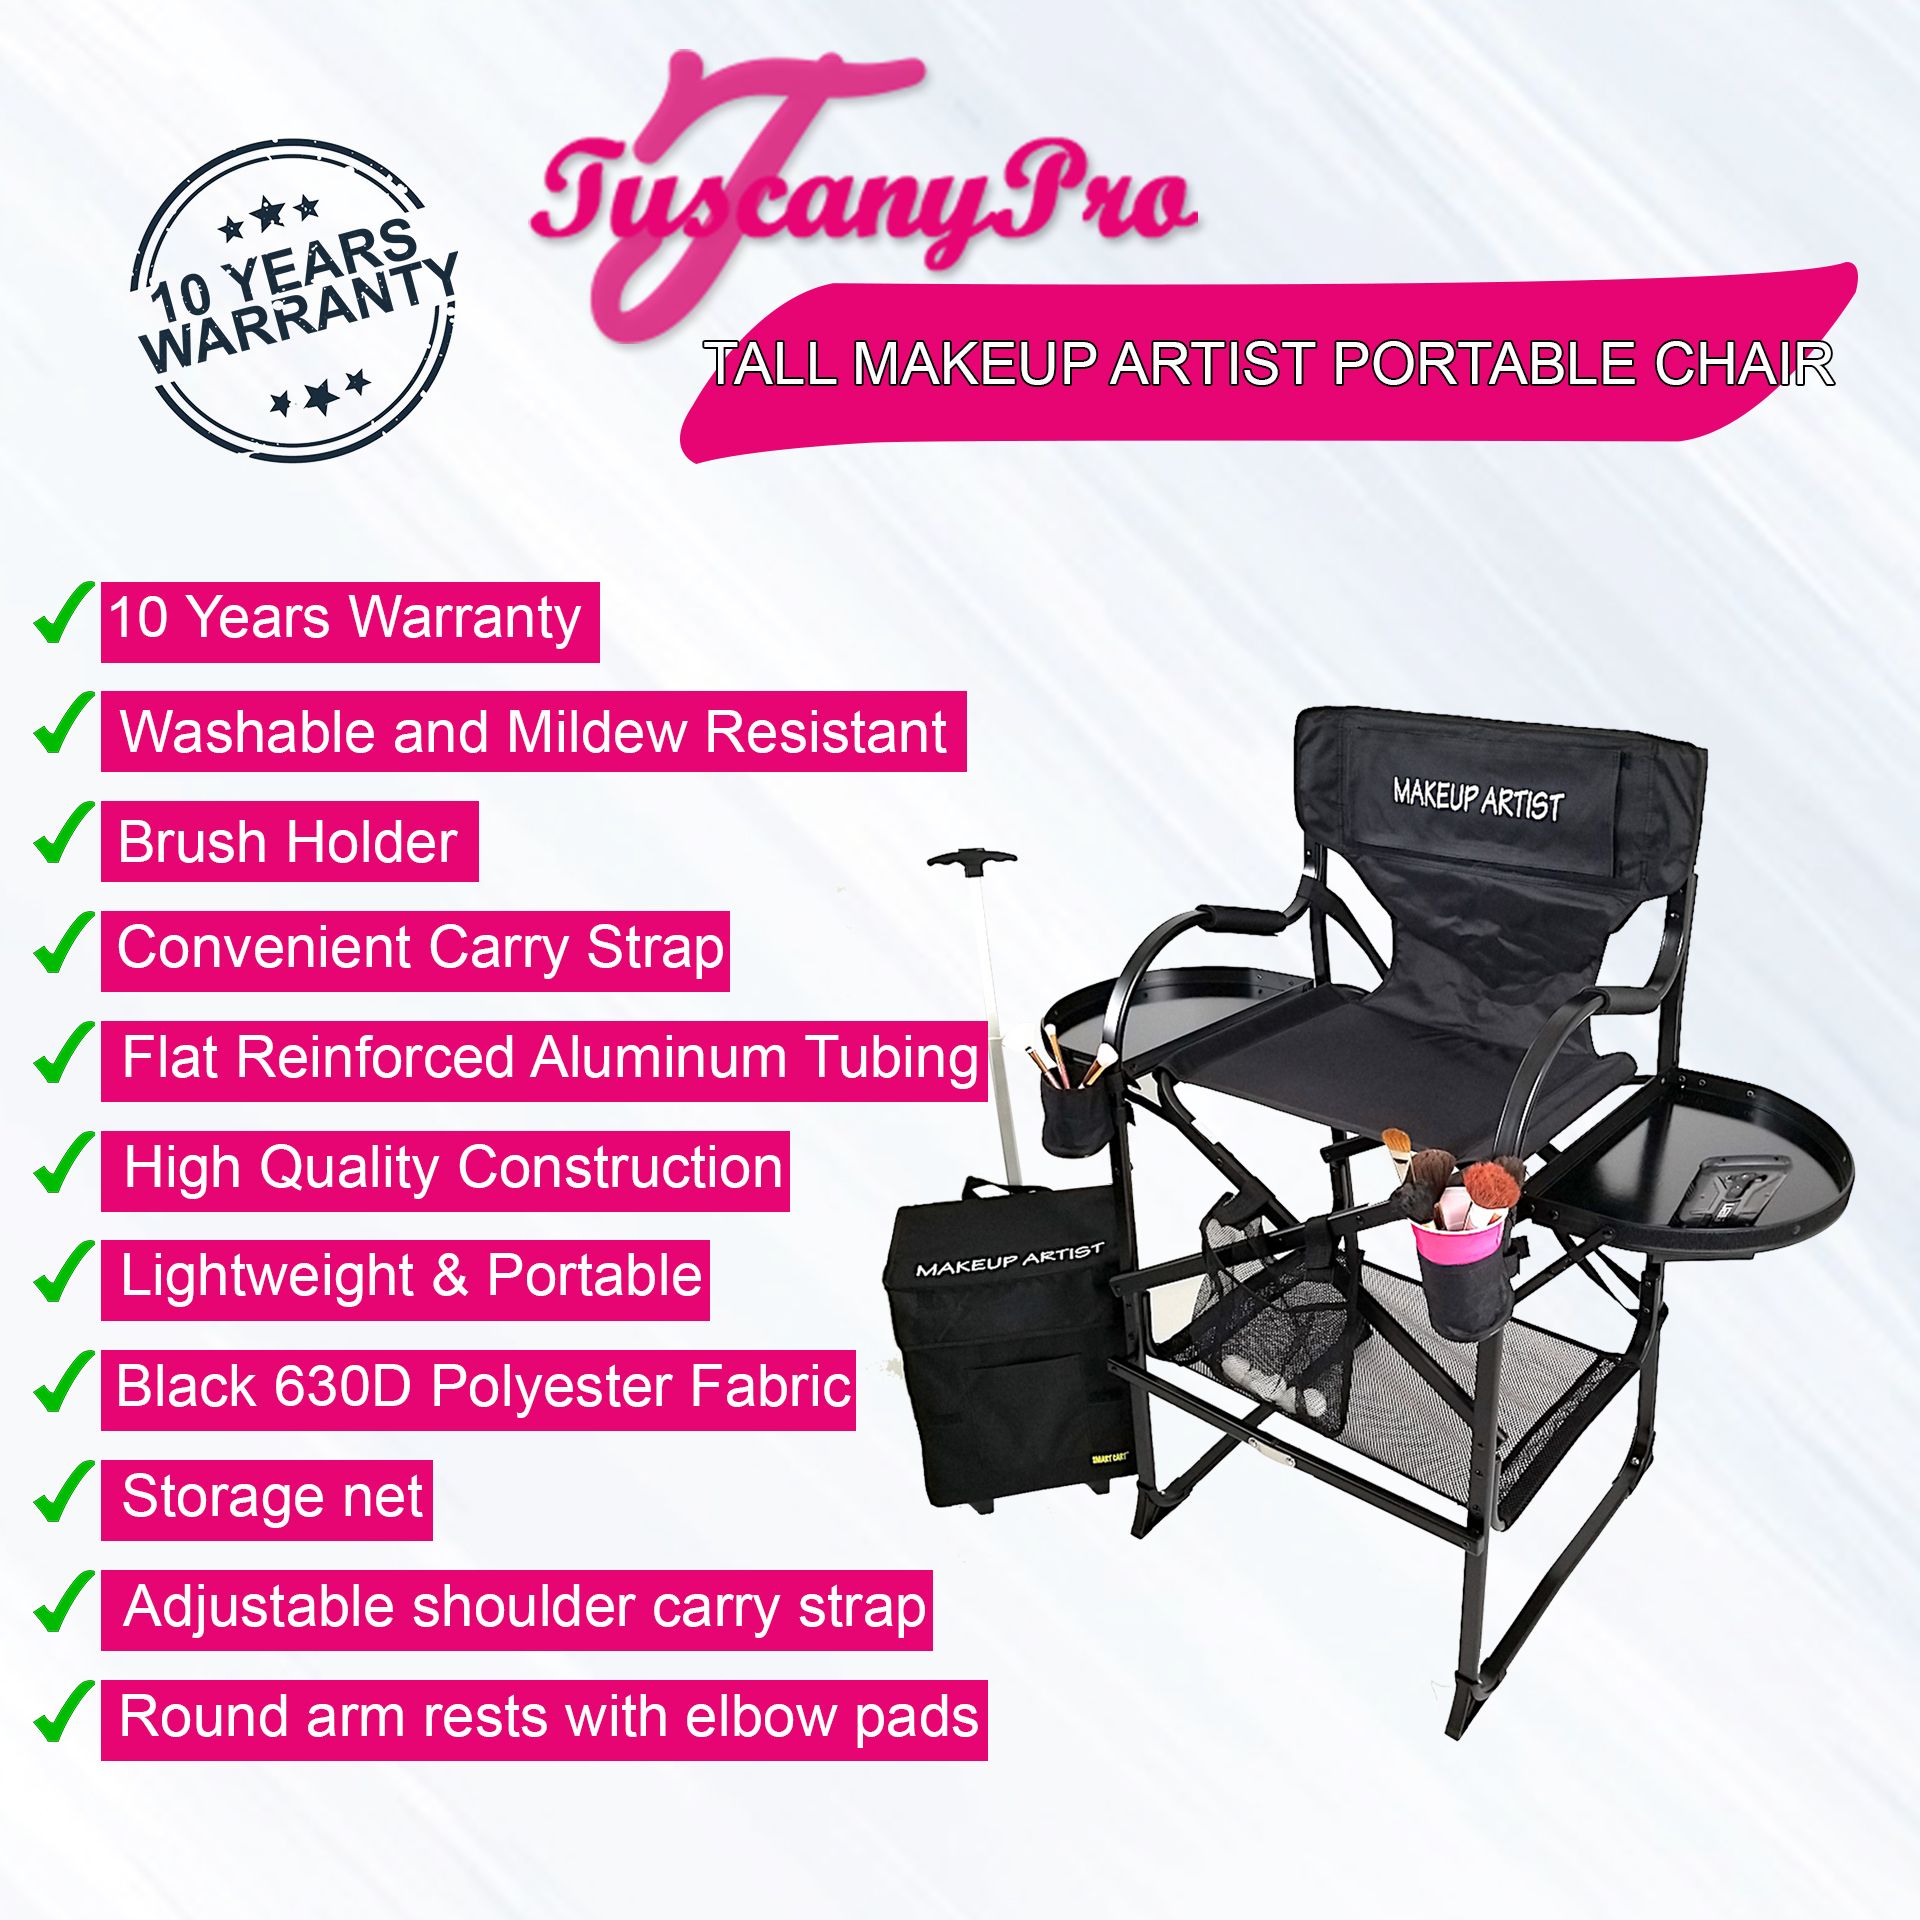 TALL MAKEUP ARTIST PORTABLE CHAIR DELUXE COMBO